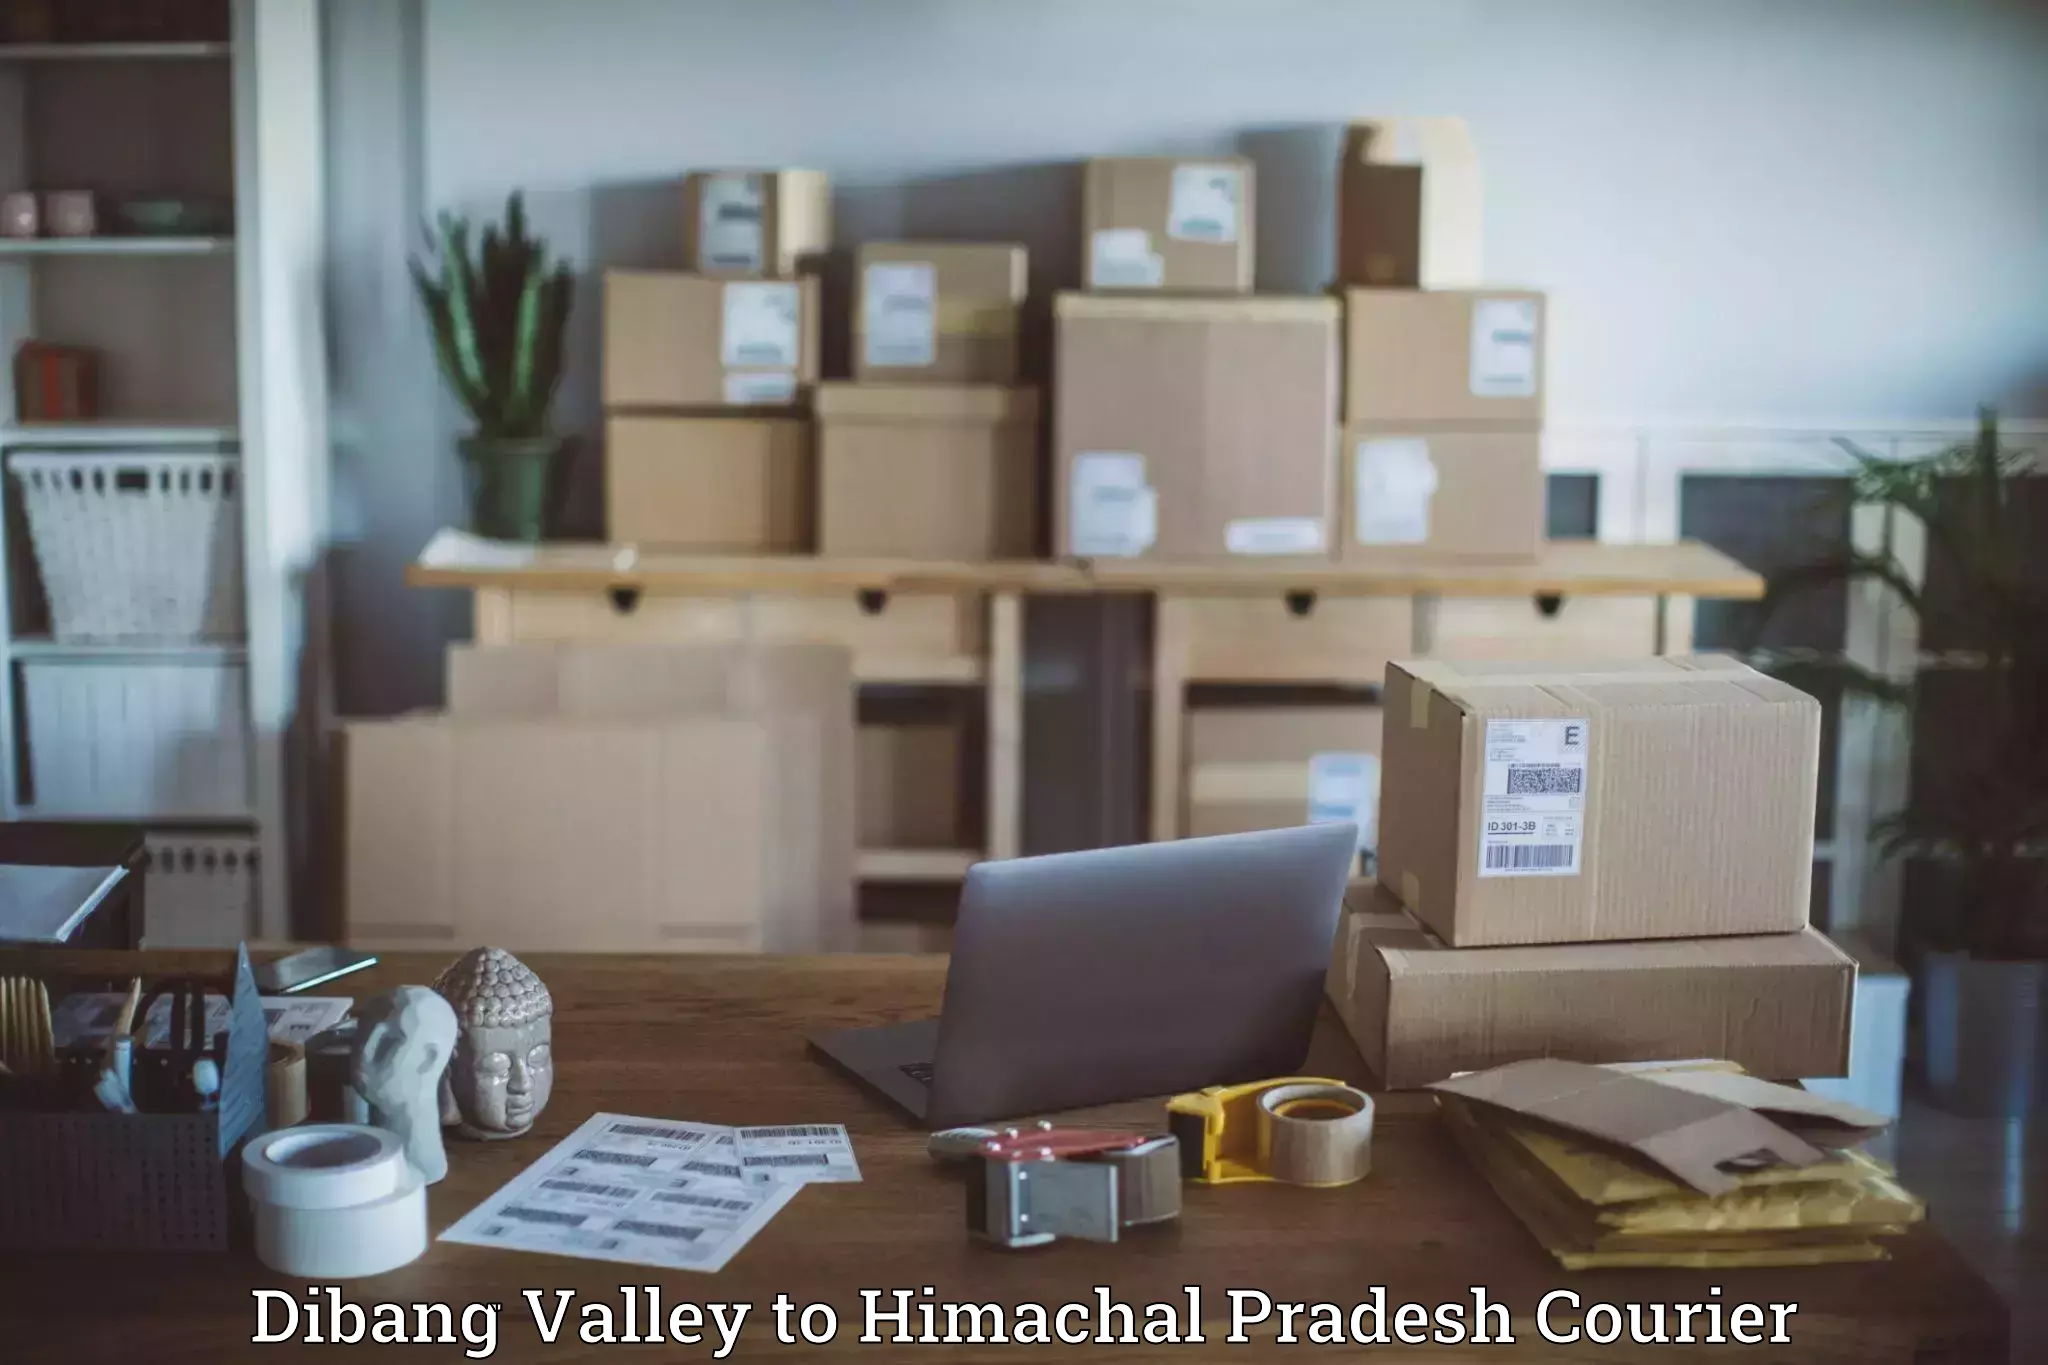 Express delivery network Dibang Valley to Himachal Pradesh